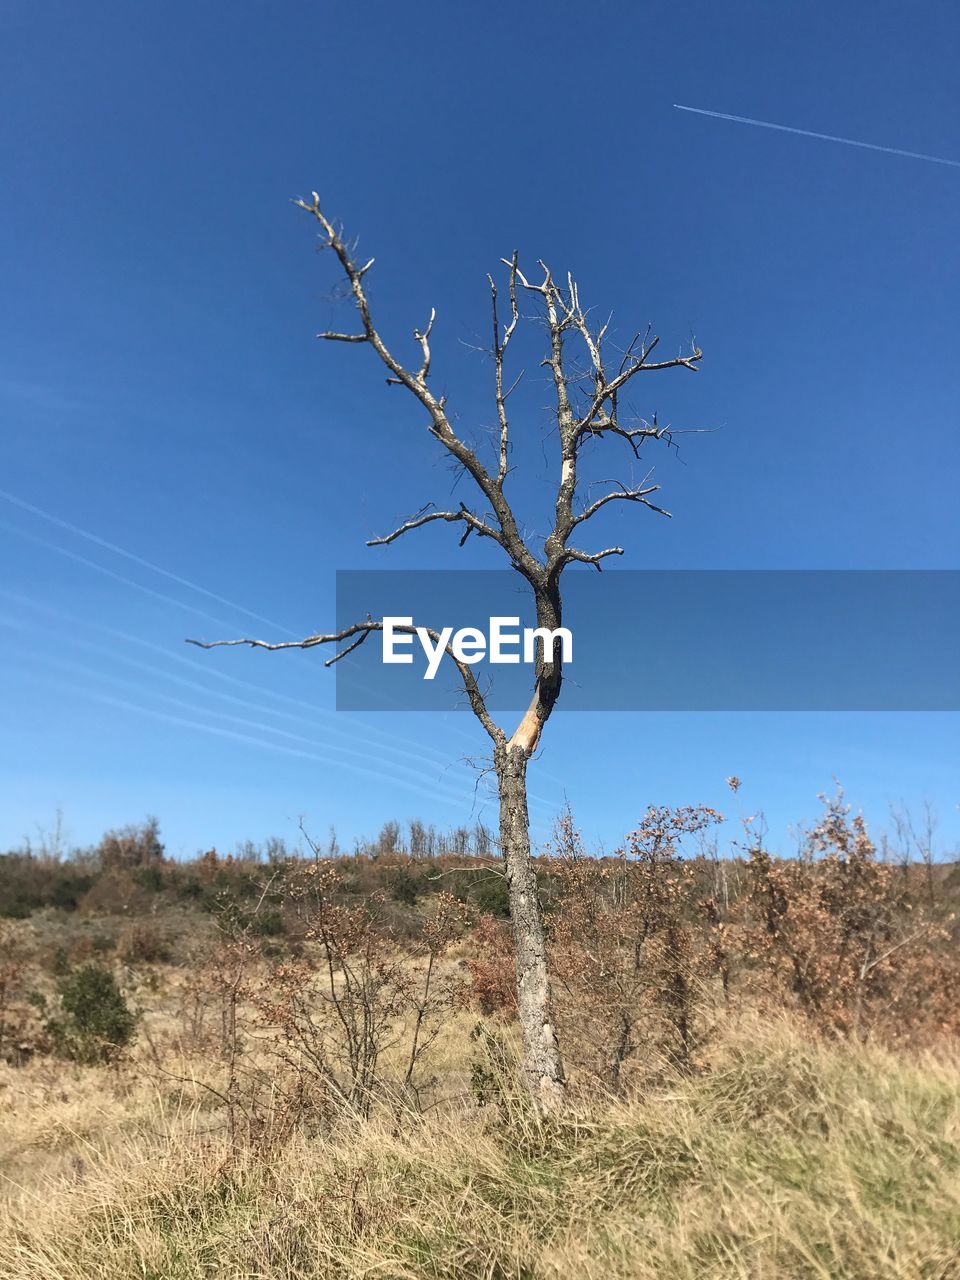 VIEW OF TREE AGAINST CLEAR SKY